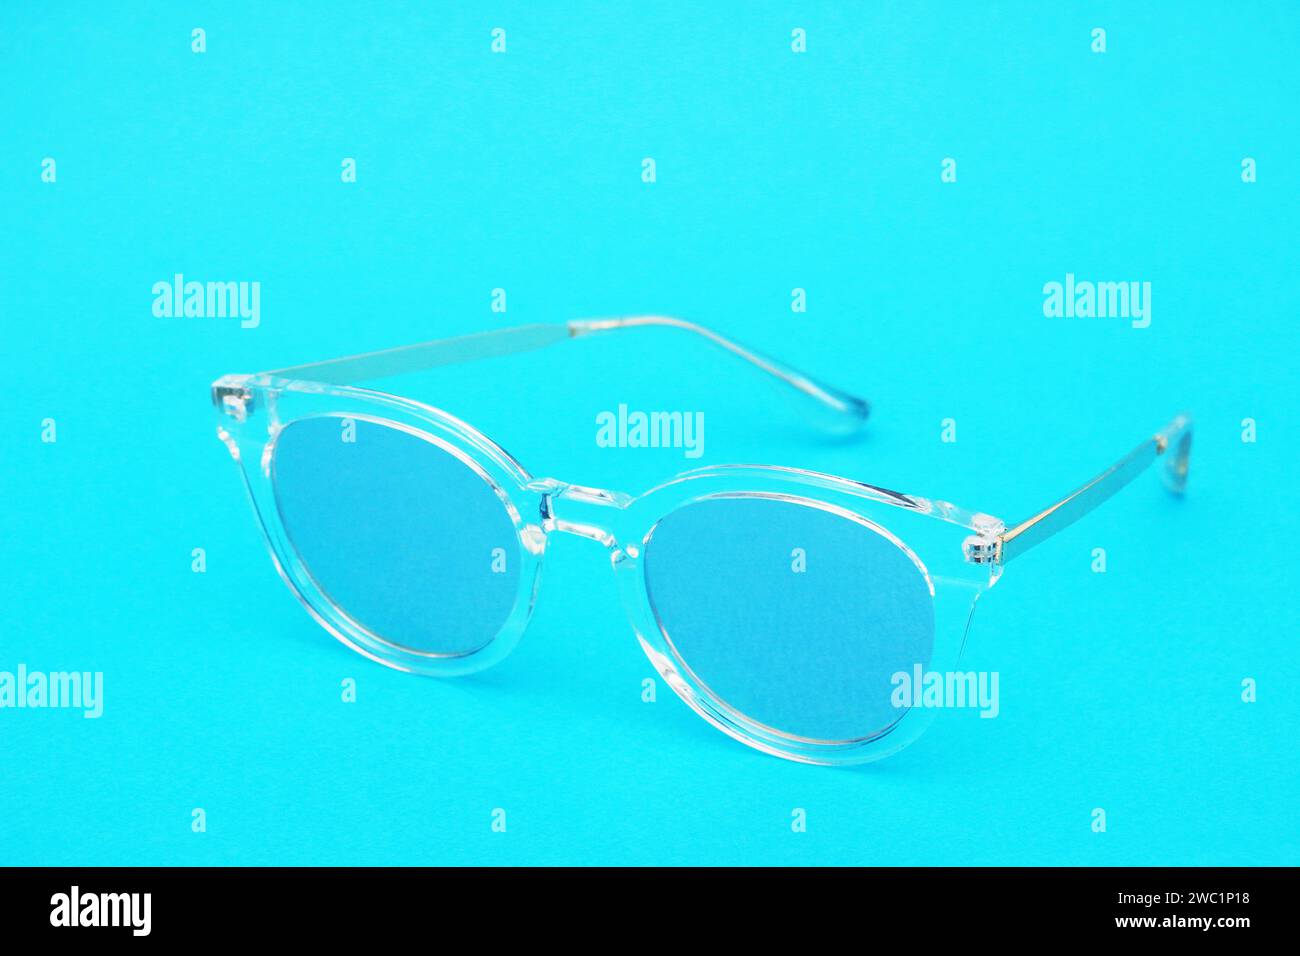 Toned image of glasses. Sunglasses with a transparent frame and blue lenses on a blue paper background. Stock Photo